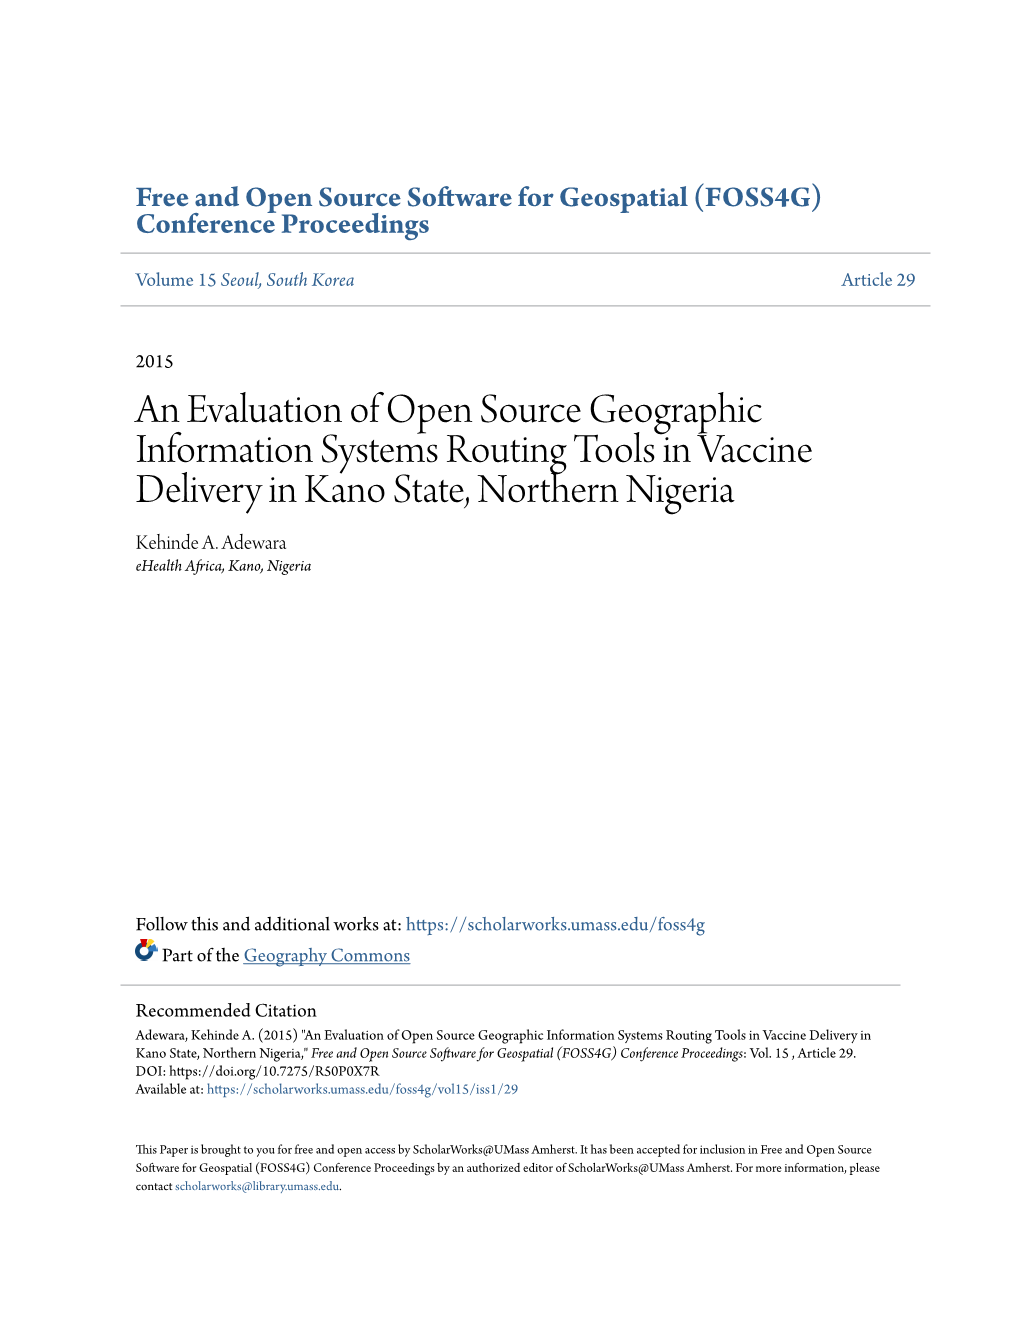 An Evaluation of Open Source Geographic Information Systems Routing Tools in Vaccine Delivery in Kano State, Northern Nigeria Kehinde A